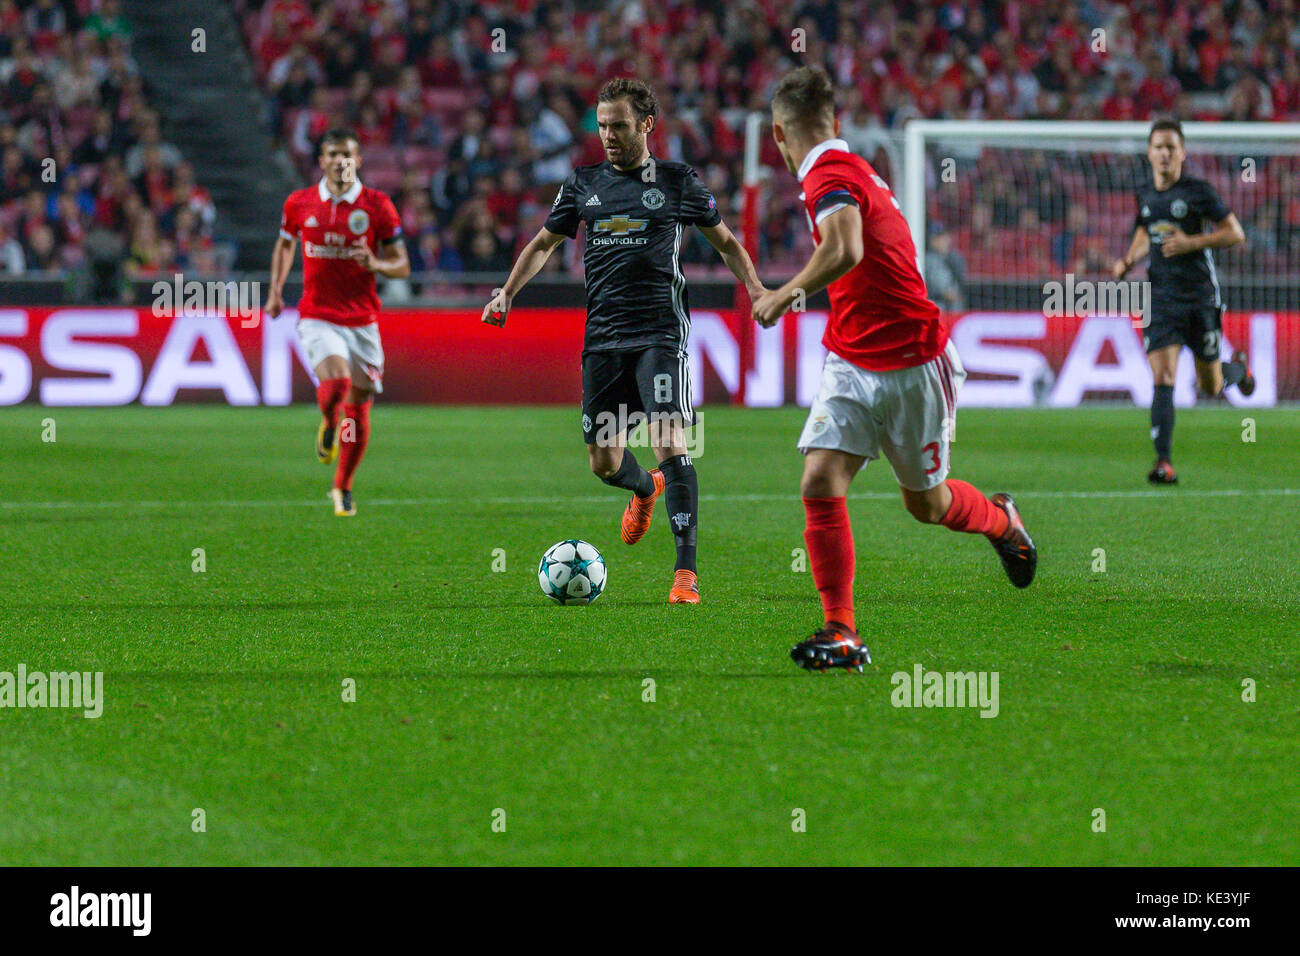 Lisbon, Portugal. 18th Oct, 2017. October 18, 2017. Lisbon, Portugal. Manchester UnitedÕs forward from Spain Juan Manuel Mata (8) during the game of the 3rd round of the UEFA Champions League Group A, SL Benfica v Manchester United FC Credit: Alexandre de Sousa/Alamy Live News Stock Photo